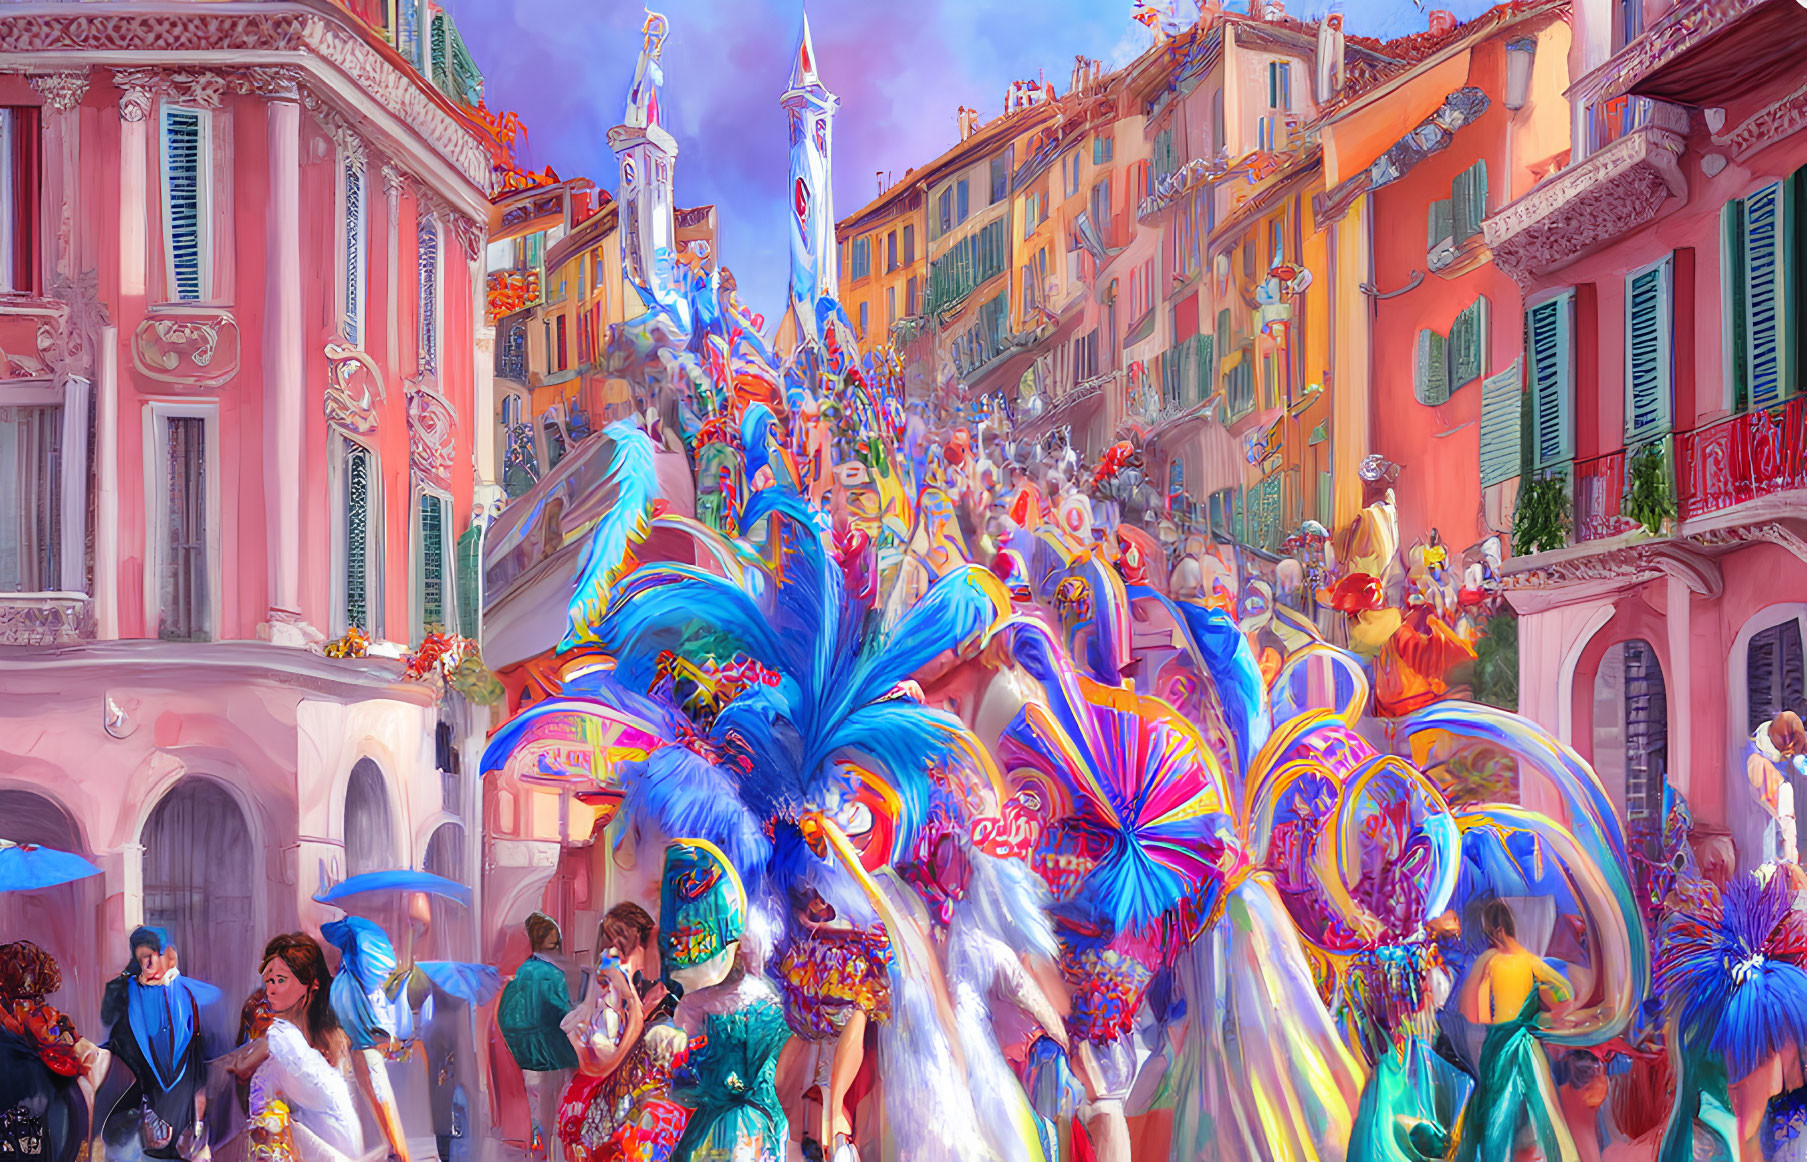 Colorful Street Parade with Elaborate Costumes and Feathers